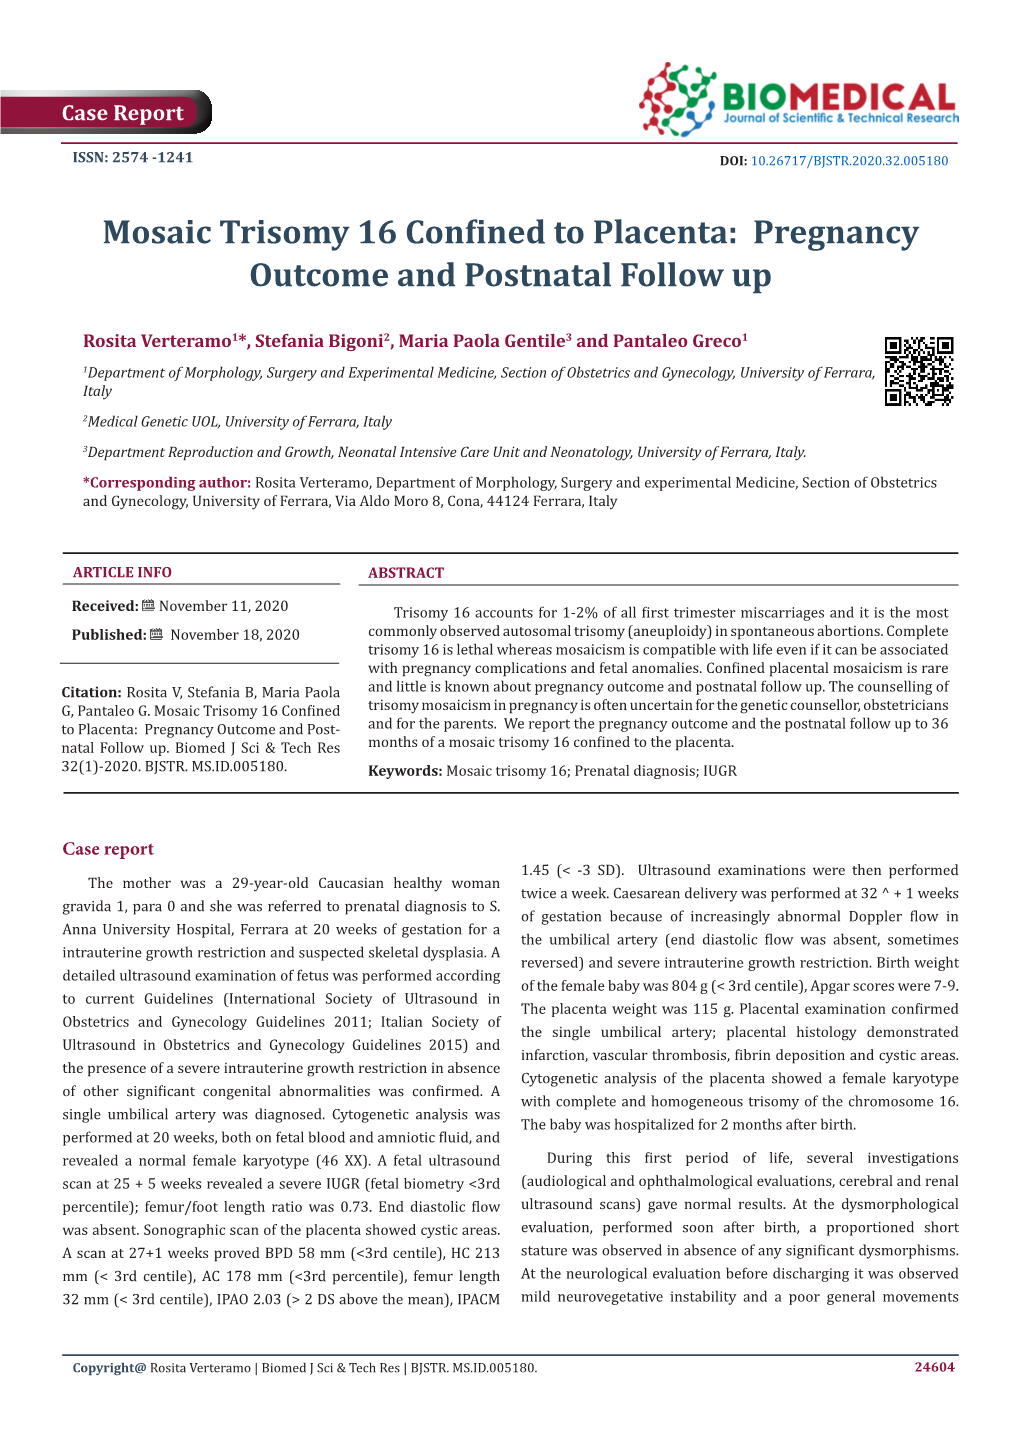 Mosaic Trisomy 16 Confined to Placenta: Pregnancy Outcome and Postnatal Follow Up